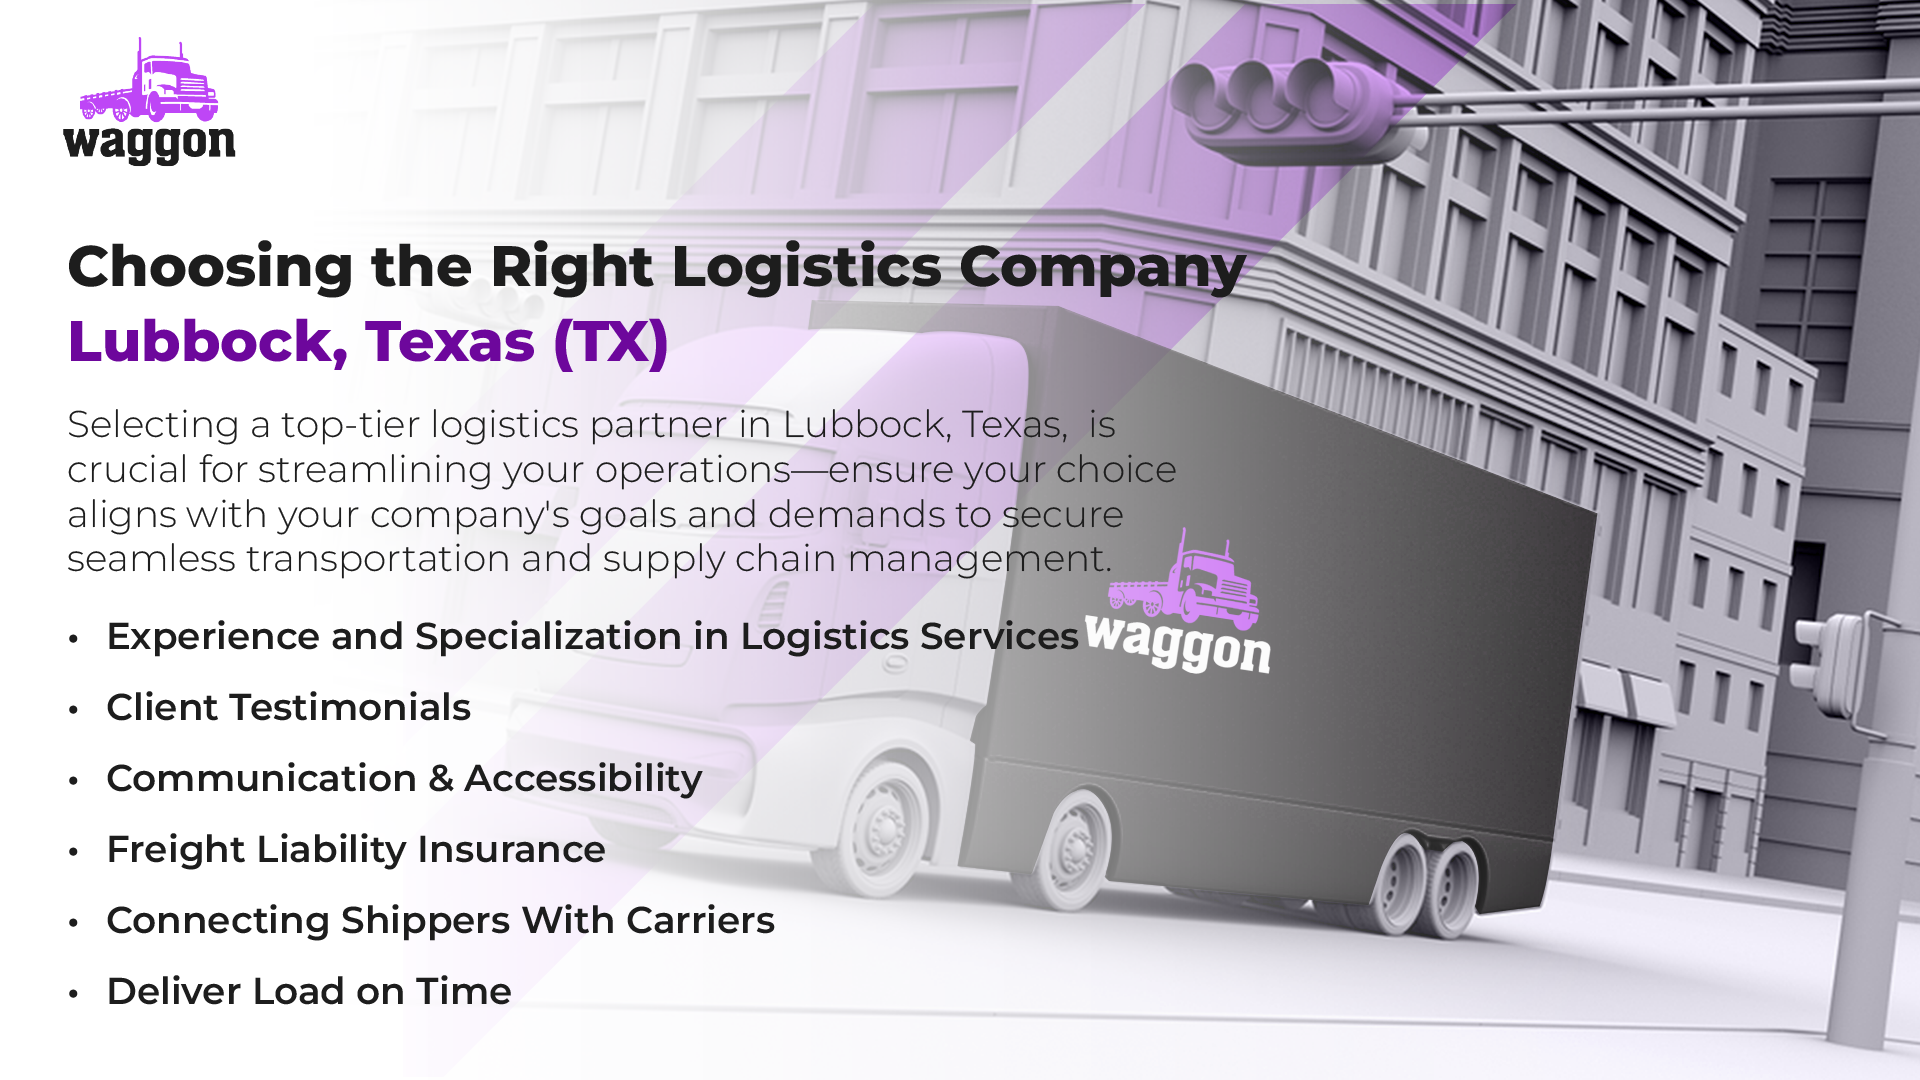 Choosing the Right Logistics Company in Lubbock, Texas (TX)